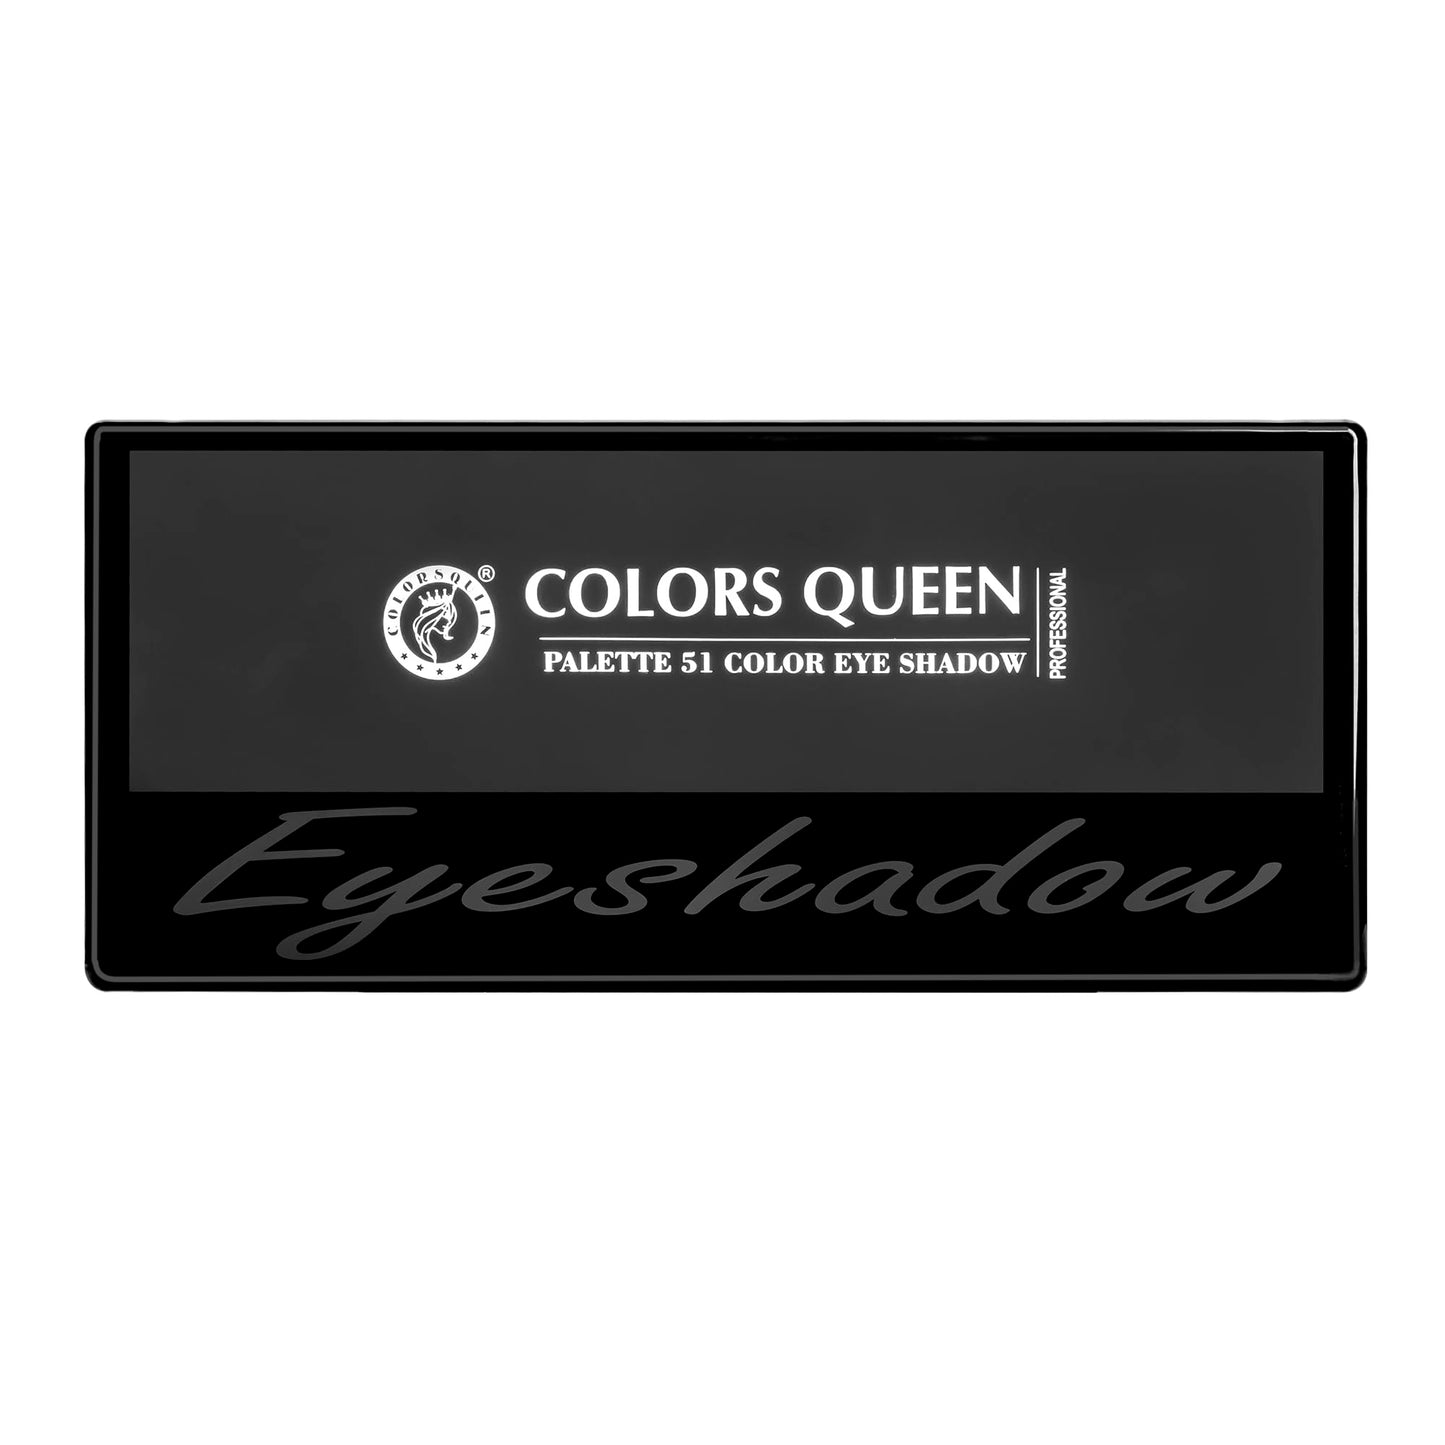 Colors Queen Ultra Pigmented 51 Colors Eyeshadow Palette with Brush | Long Wearing & Easily Blendable Eye Makeup Palette | Eyeshadow Palette with Matte, Shimmery & Metallic Finish (02) 